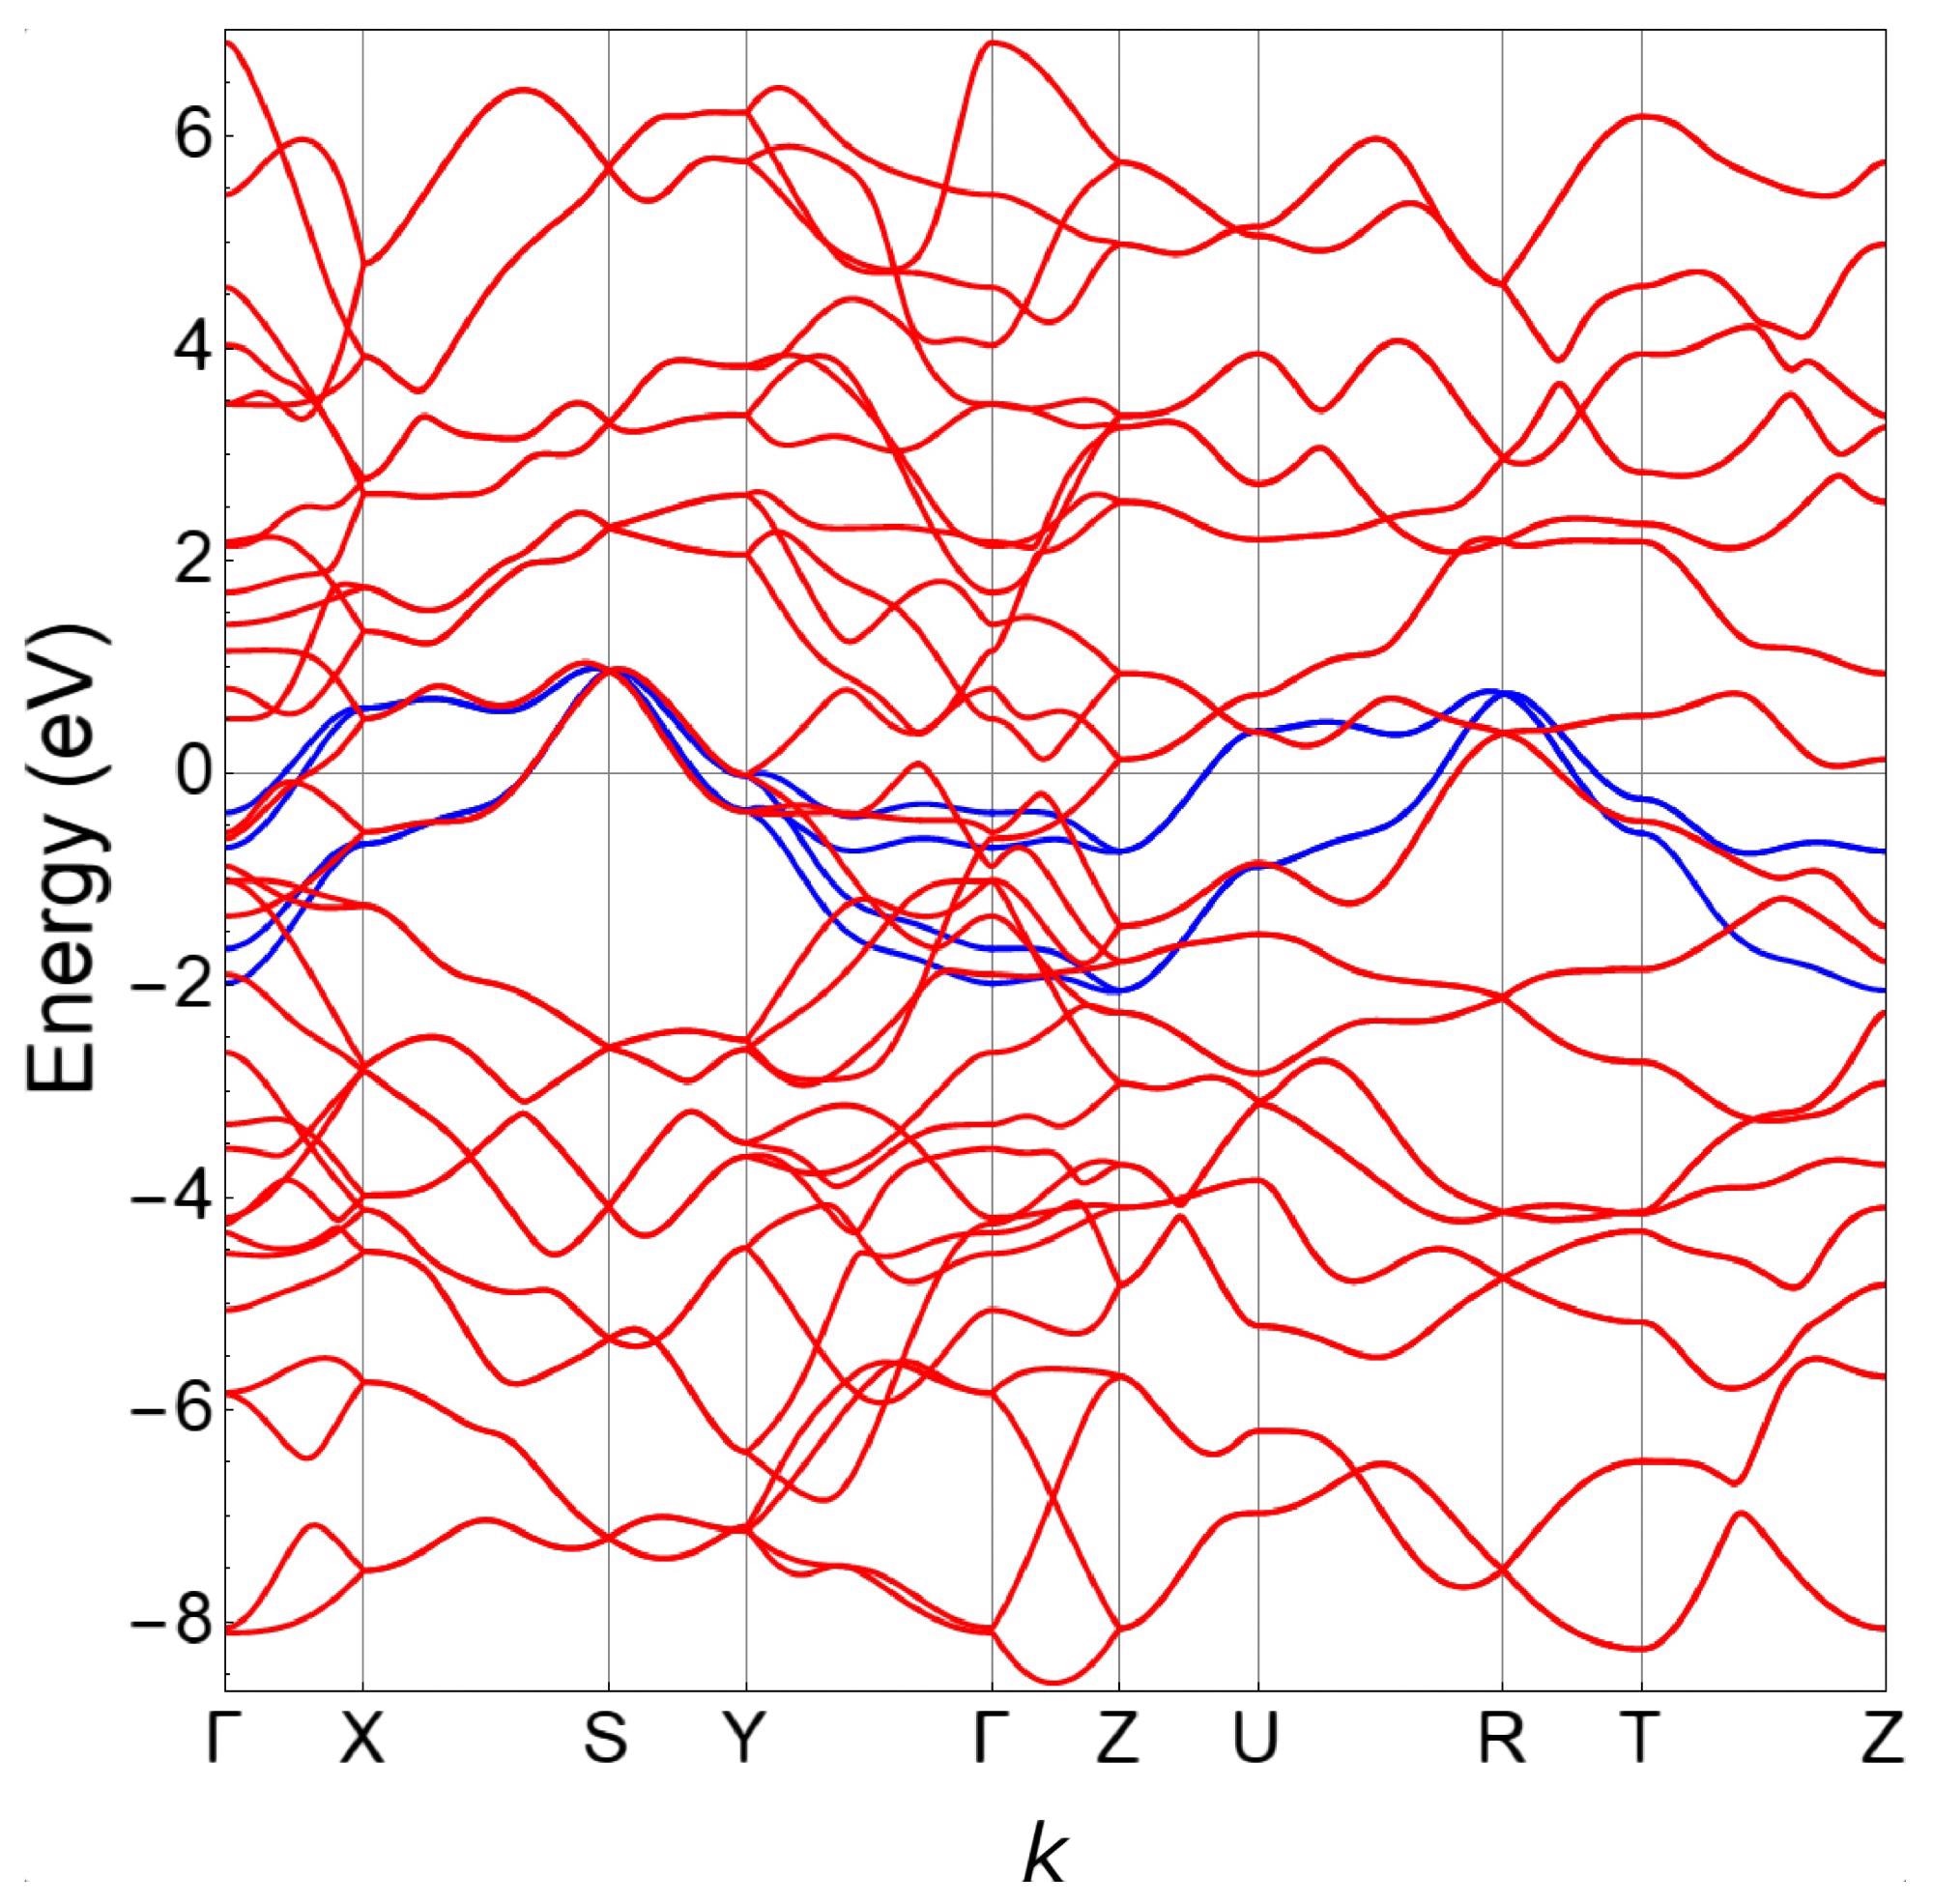 Fit of the DFT bands (red lines) using the tight-binding model (blue lines) along the high-symmetry path of the orthorhombic Brillouin zone. The Fermi level is at zero energy.